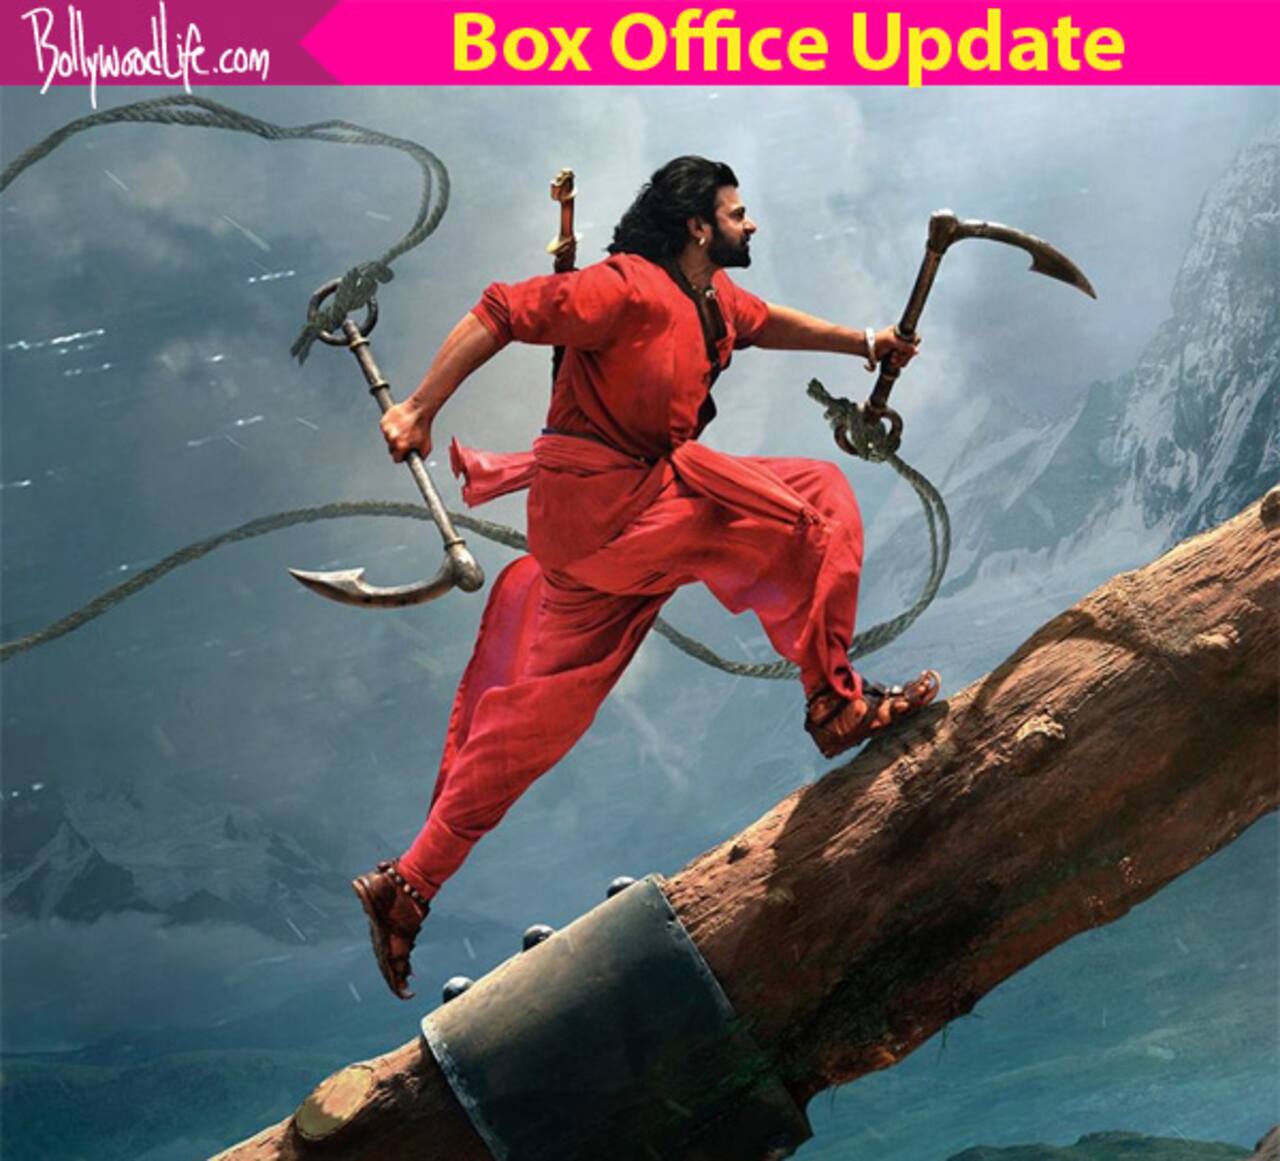 Baahubali 2 - The Conclusion box office collection day 29: Prabhas starrer  earns Rs 1613 crore worldwide; all set to go past Rs 500 crore nett in its  Hindi version - Bollywood